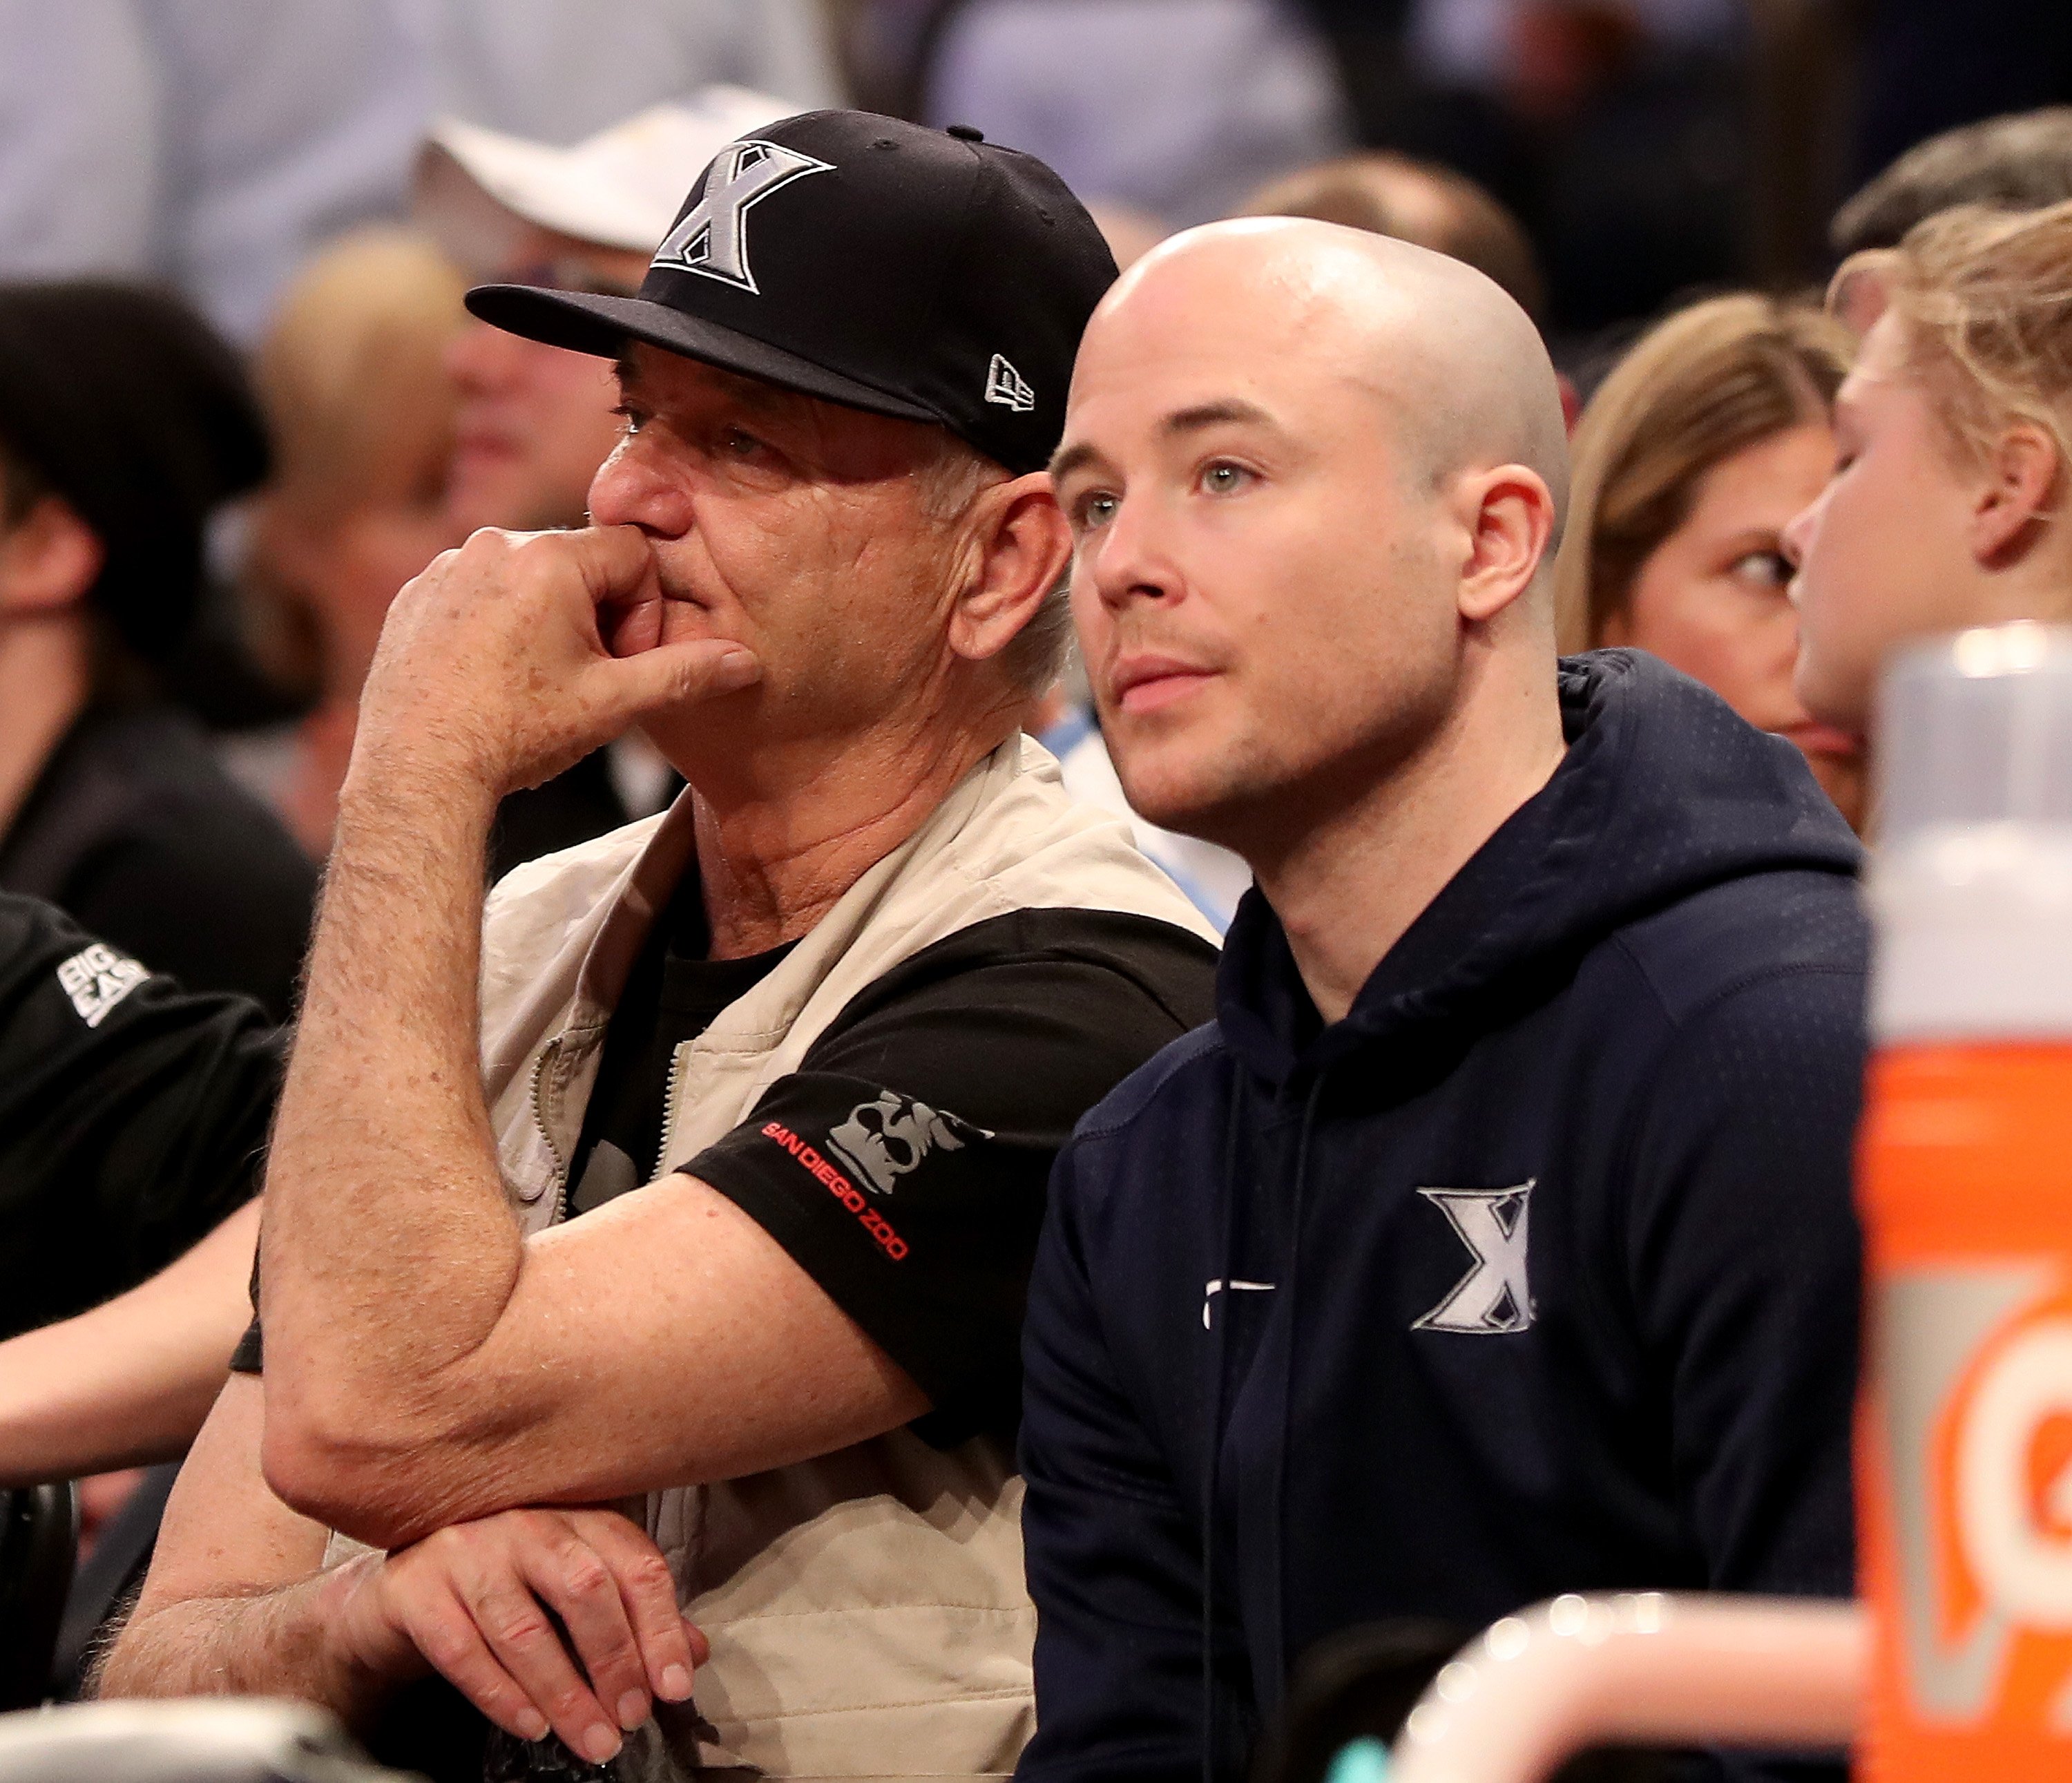 Bill Murray with his son  Luke Murray at the quarterfinals of the Big East Basketball Tournament in 2016 at Madison Square Garden in New York City. | Source: Getty Images